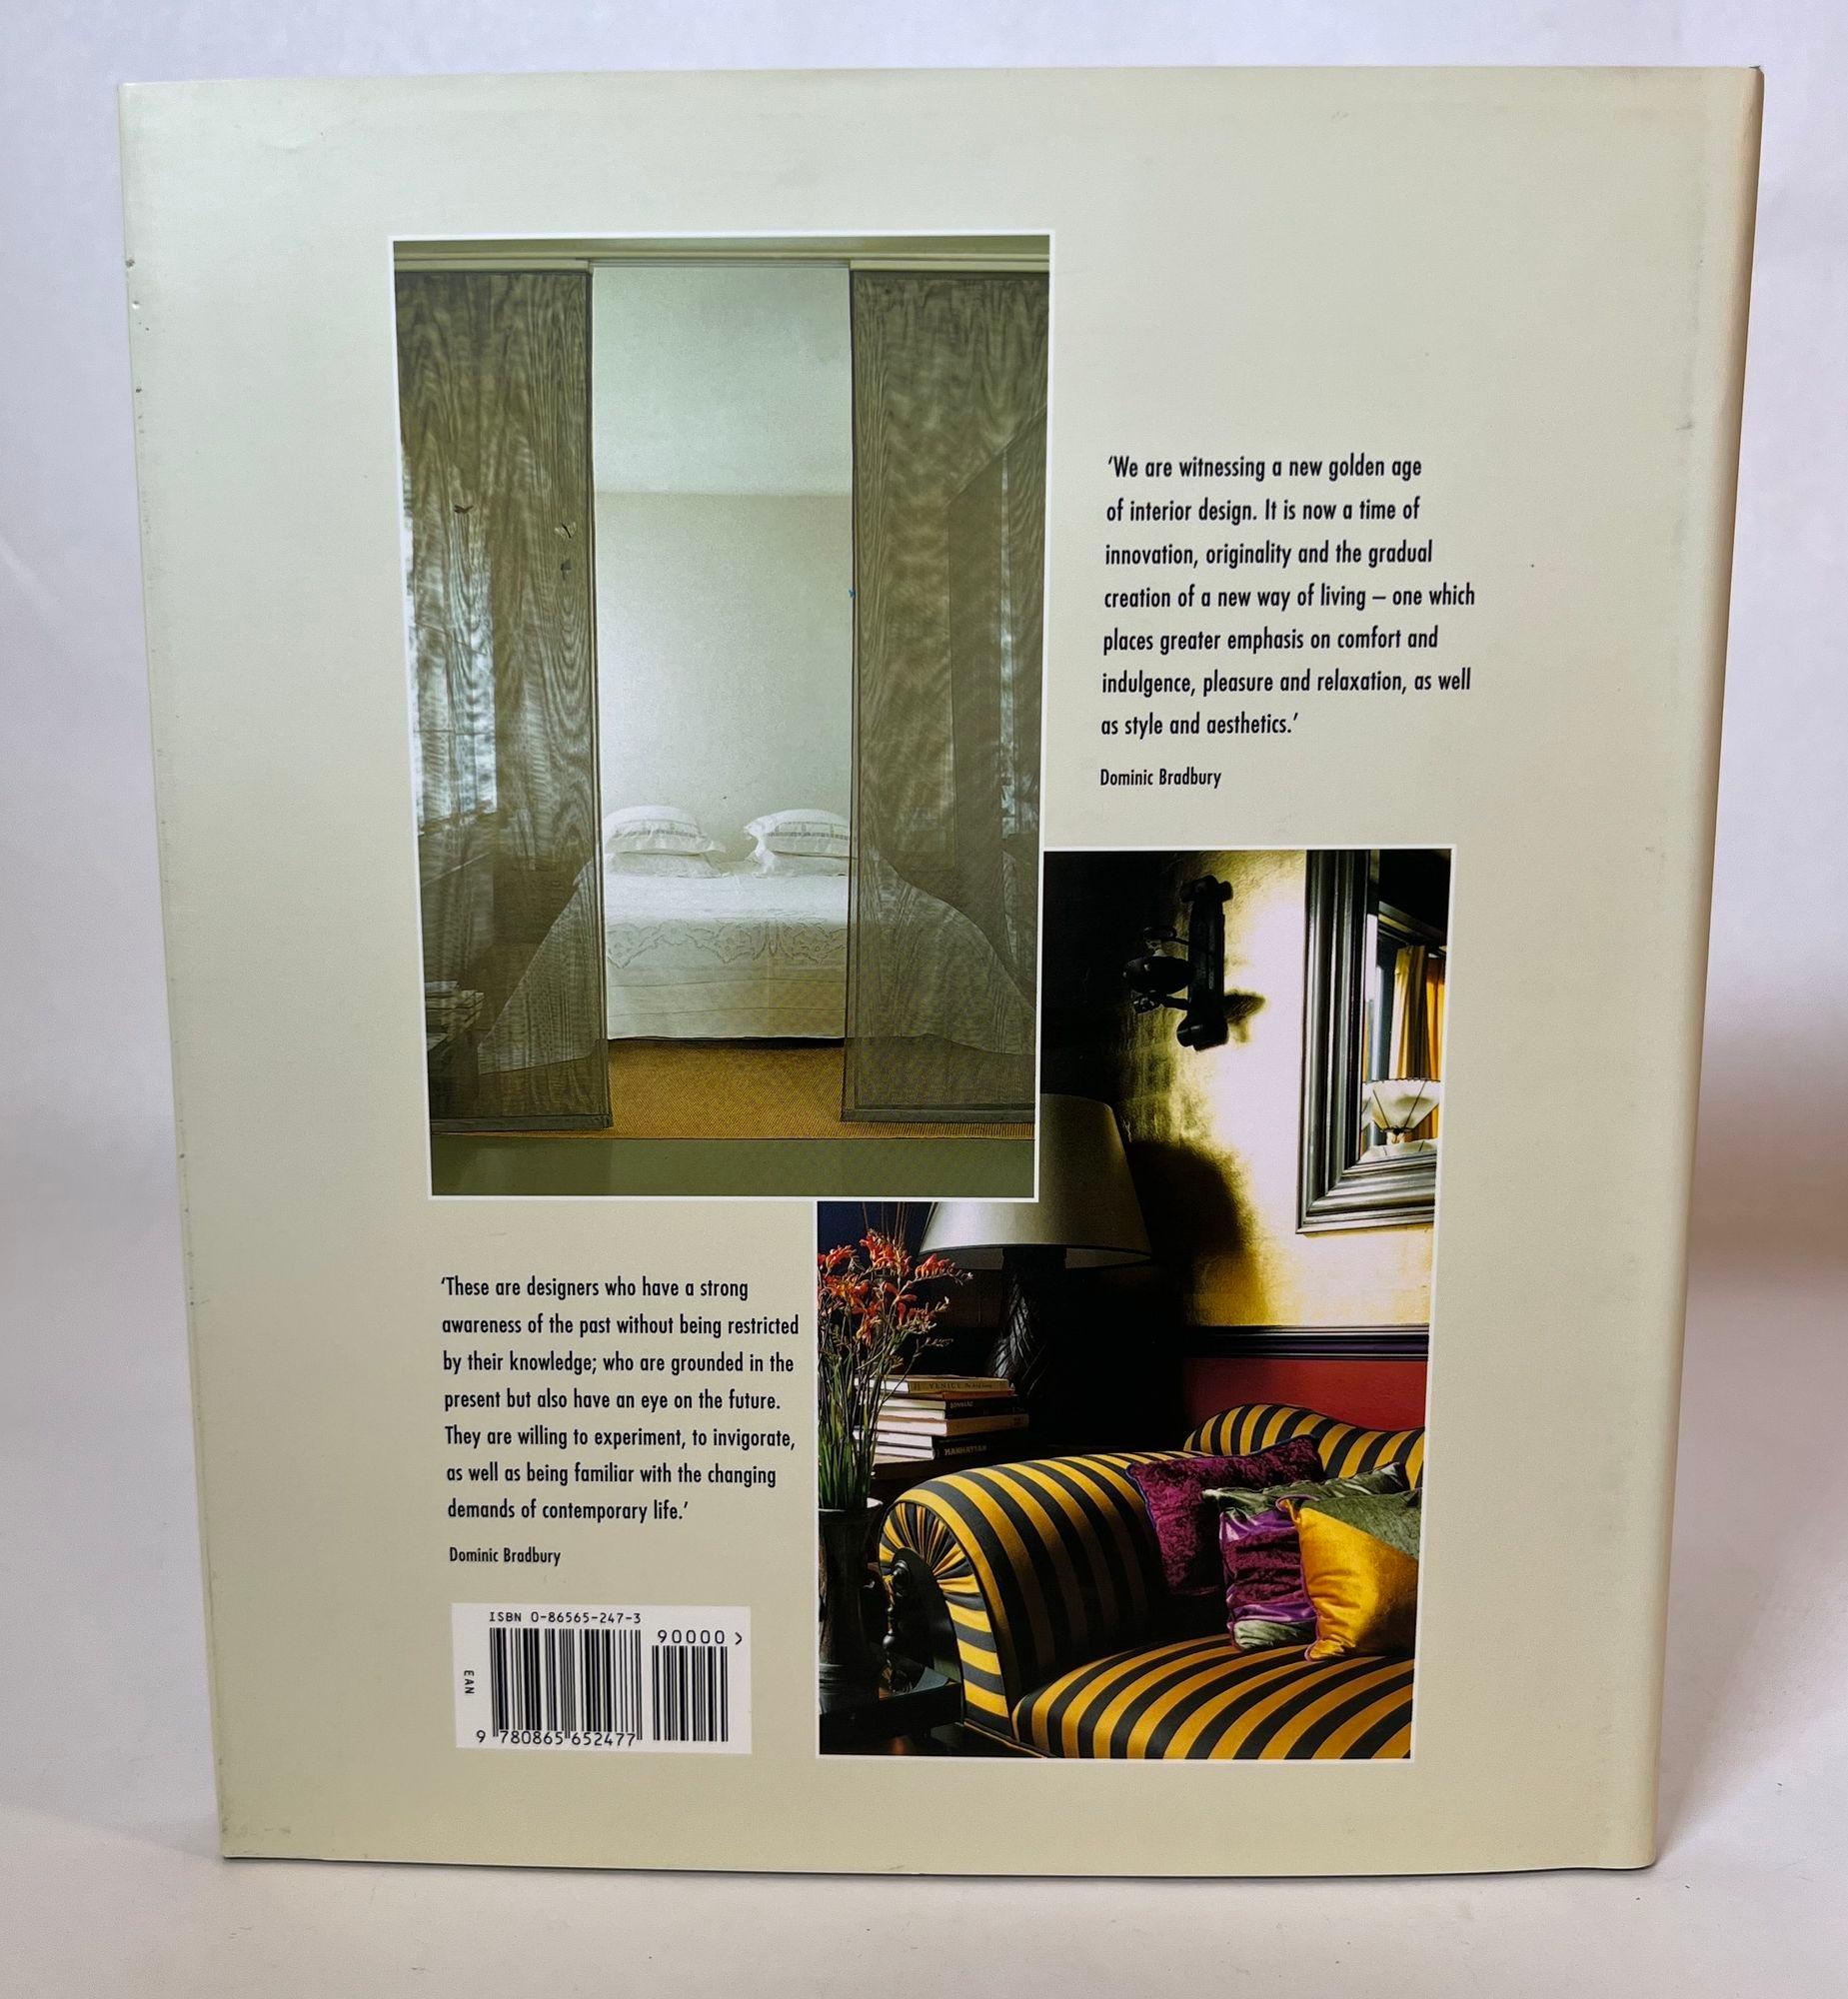 French Designers' Houses Hardcover book First Edition By Dominic Bradbury 2001 For Sale